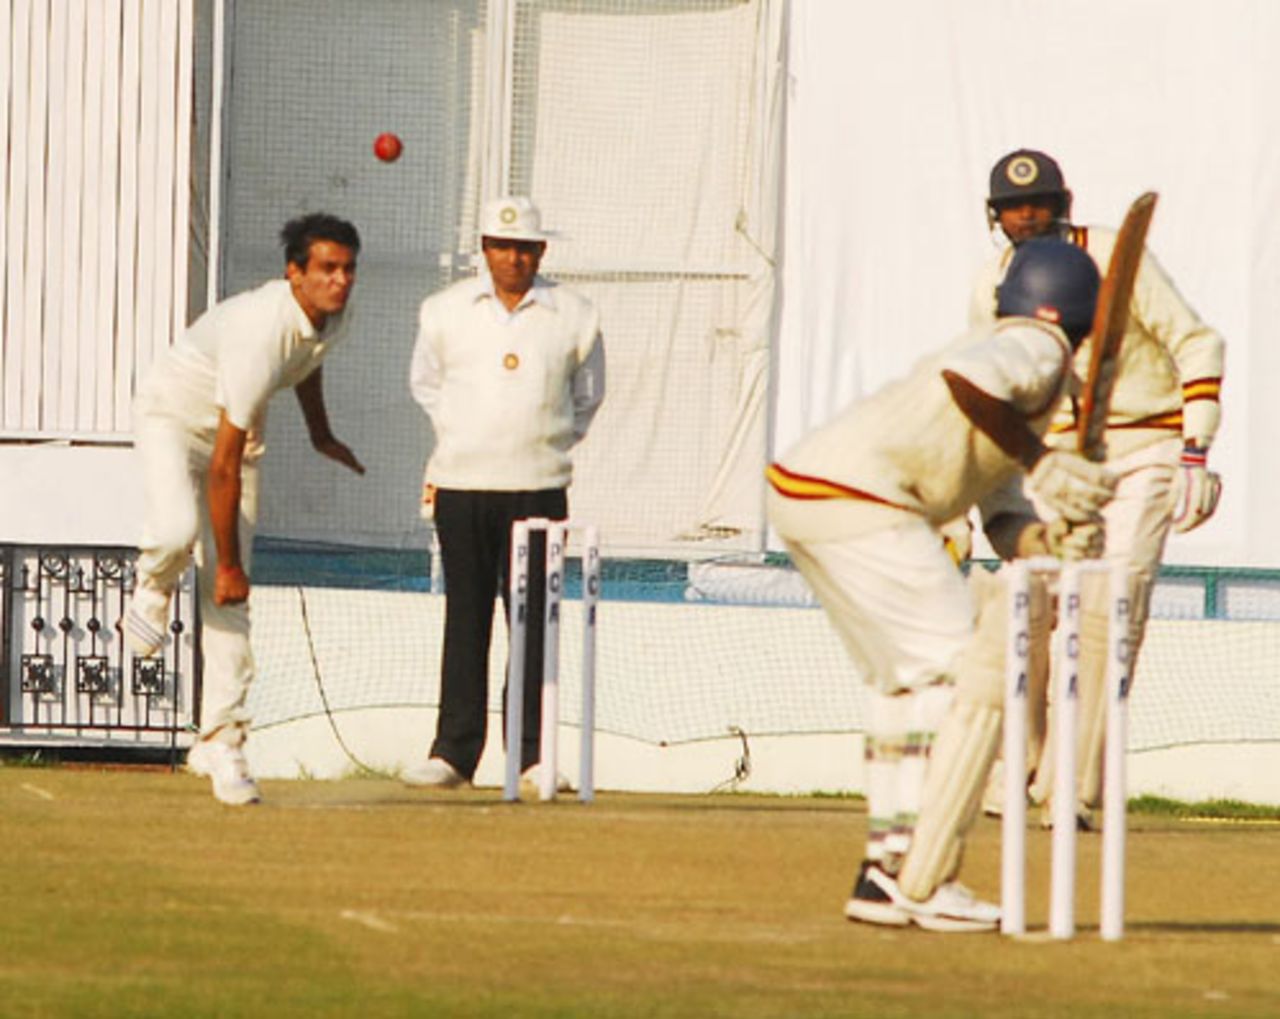 Siddarth Kaul, who took 5 for 79, seen in his delivery stride, Punjab v Orissa, Ranji Trophy Super League, Group A, 6th round, Chandigarh, 2nd day, December 18, 2007 